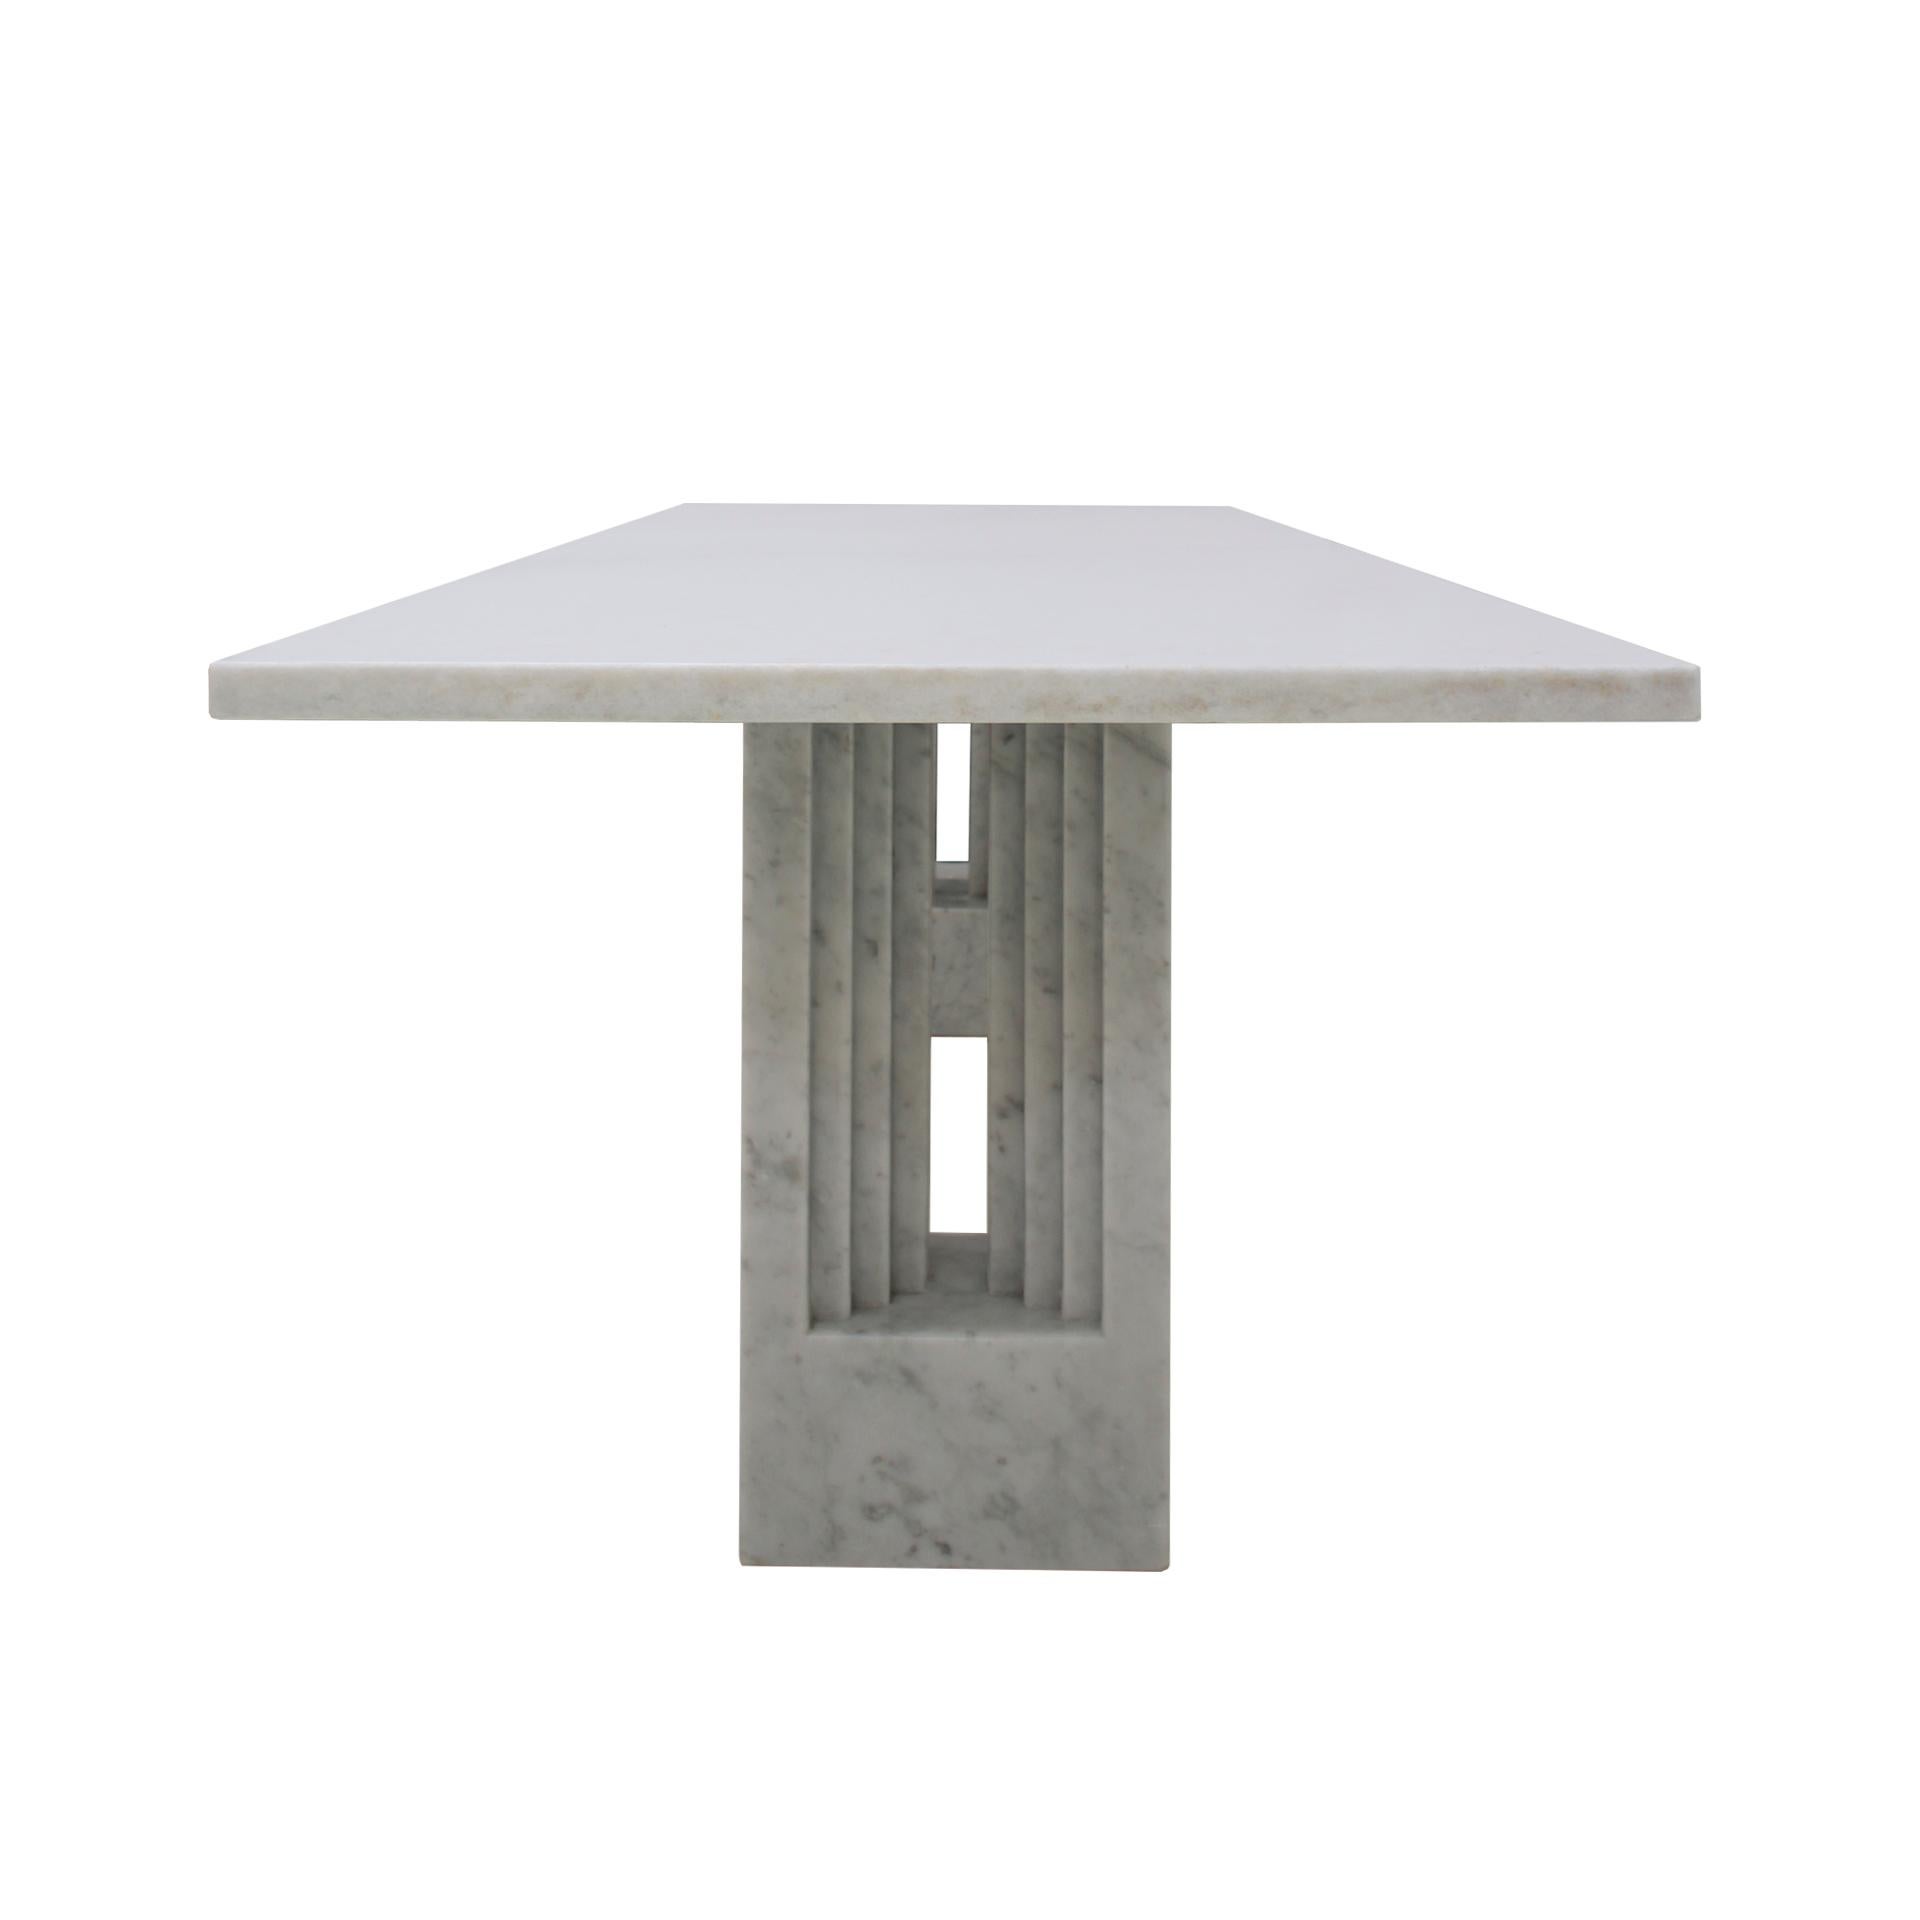 Dining table mod. Delfi designed by Carlo Scarpa and Marcel Breuer for Gavina. Composed of two sculptural bases and a rectangular top 4 cm thick. Made in Carrara marble. Italy 1968. From the Banca Antoniana of Padova and Trieste.

Our main target is